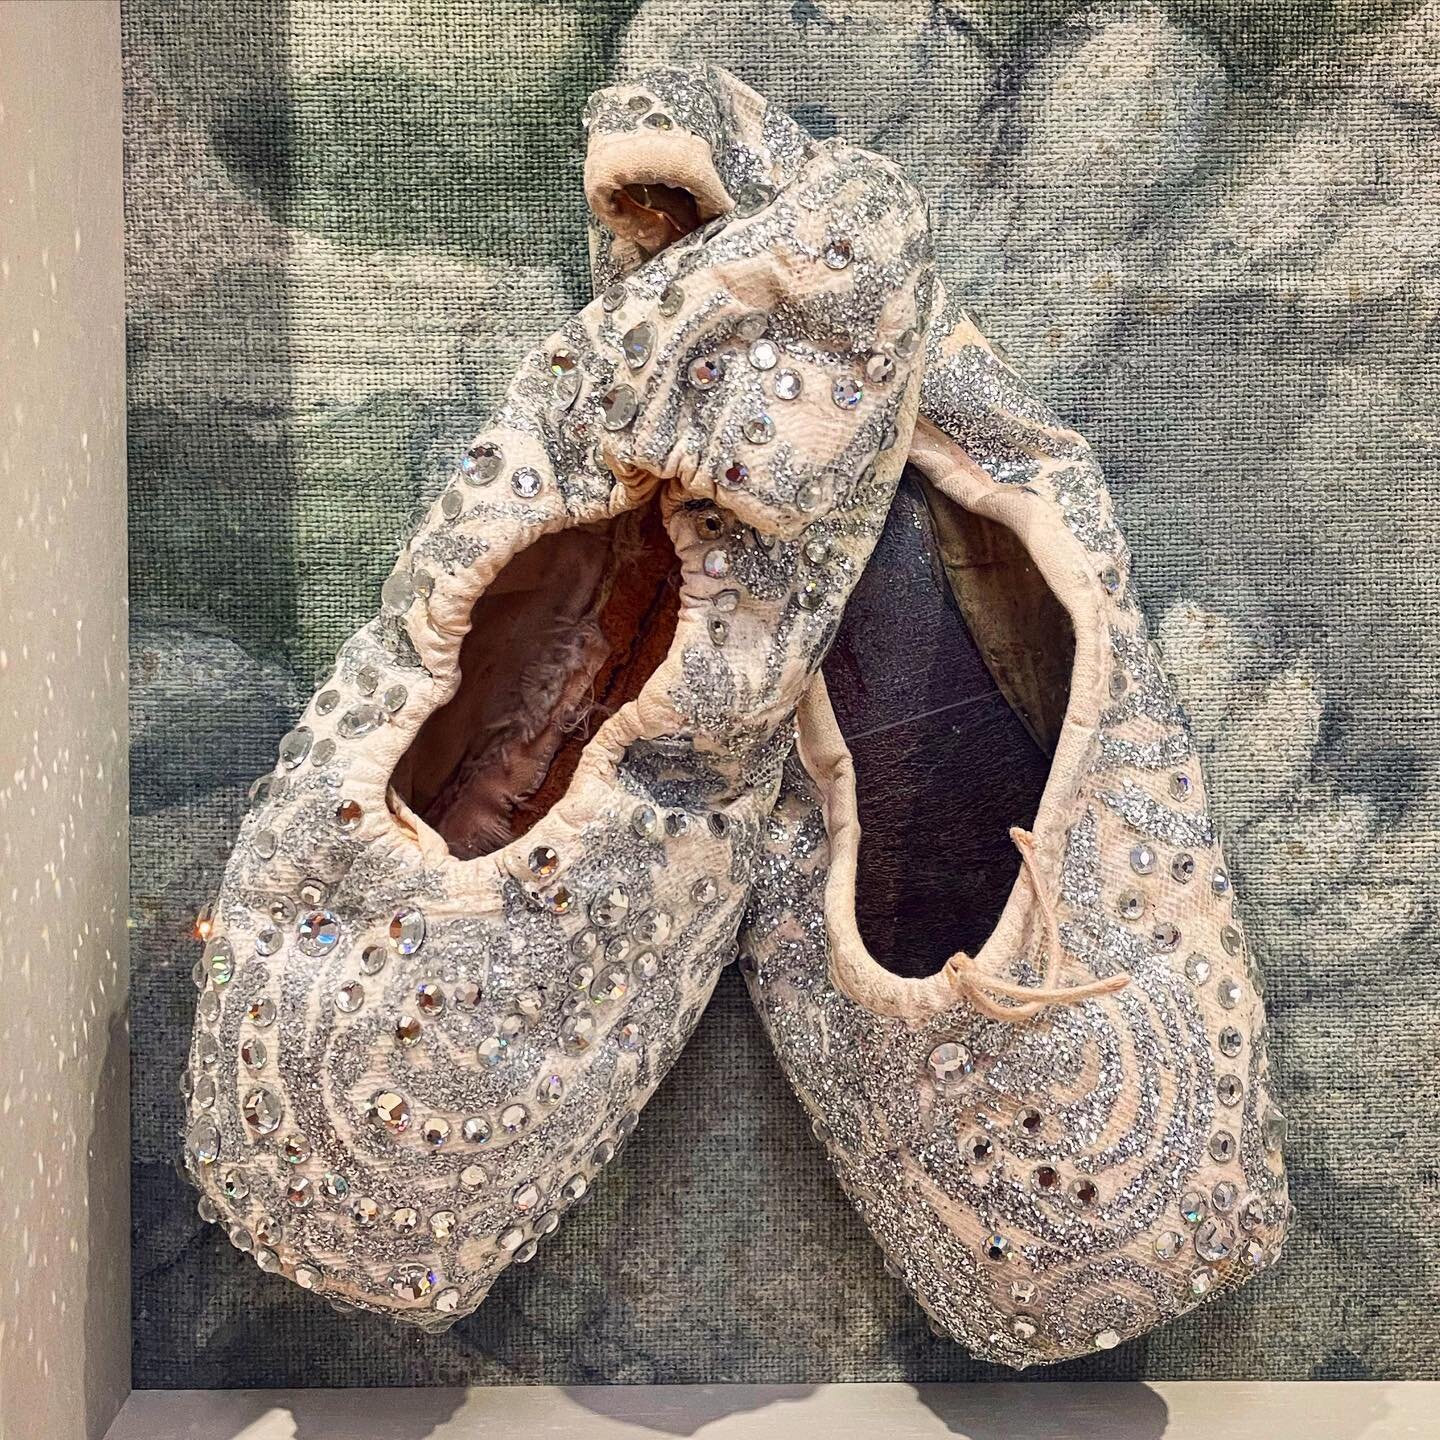 Today I visited the Royal Opera House in Covent Garden and I saw these beautiful &lsquo;Glass Slipper&rsquo; pointe shoes from a production of &lsquo;Cinderella&rsquo; on display. Aren&rsquo;t they gorgeous? ✨🩰✨
.
I adore pointe shoes. I took ballet